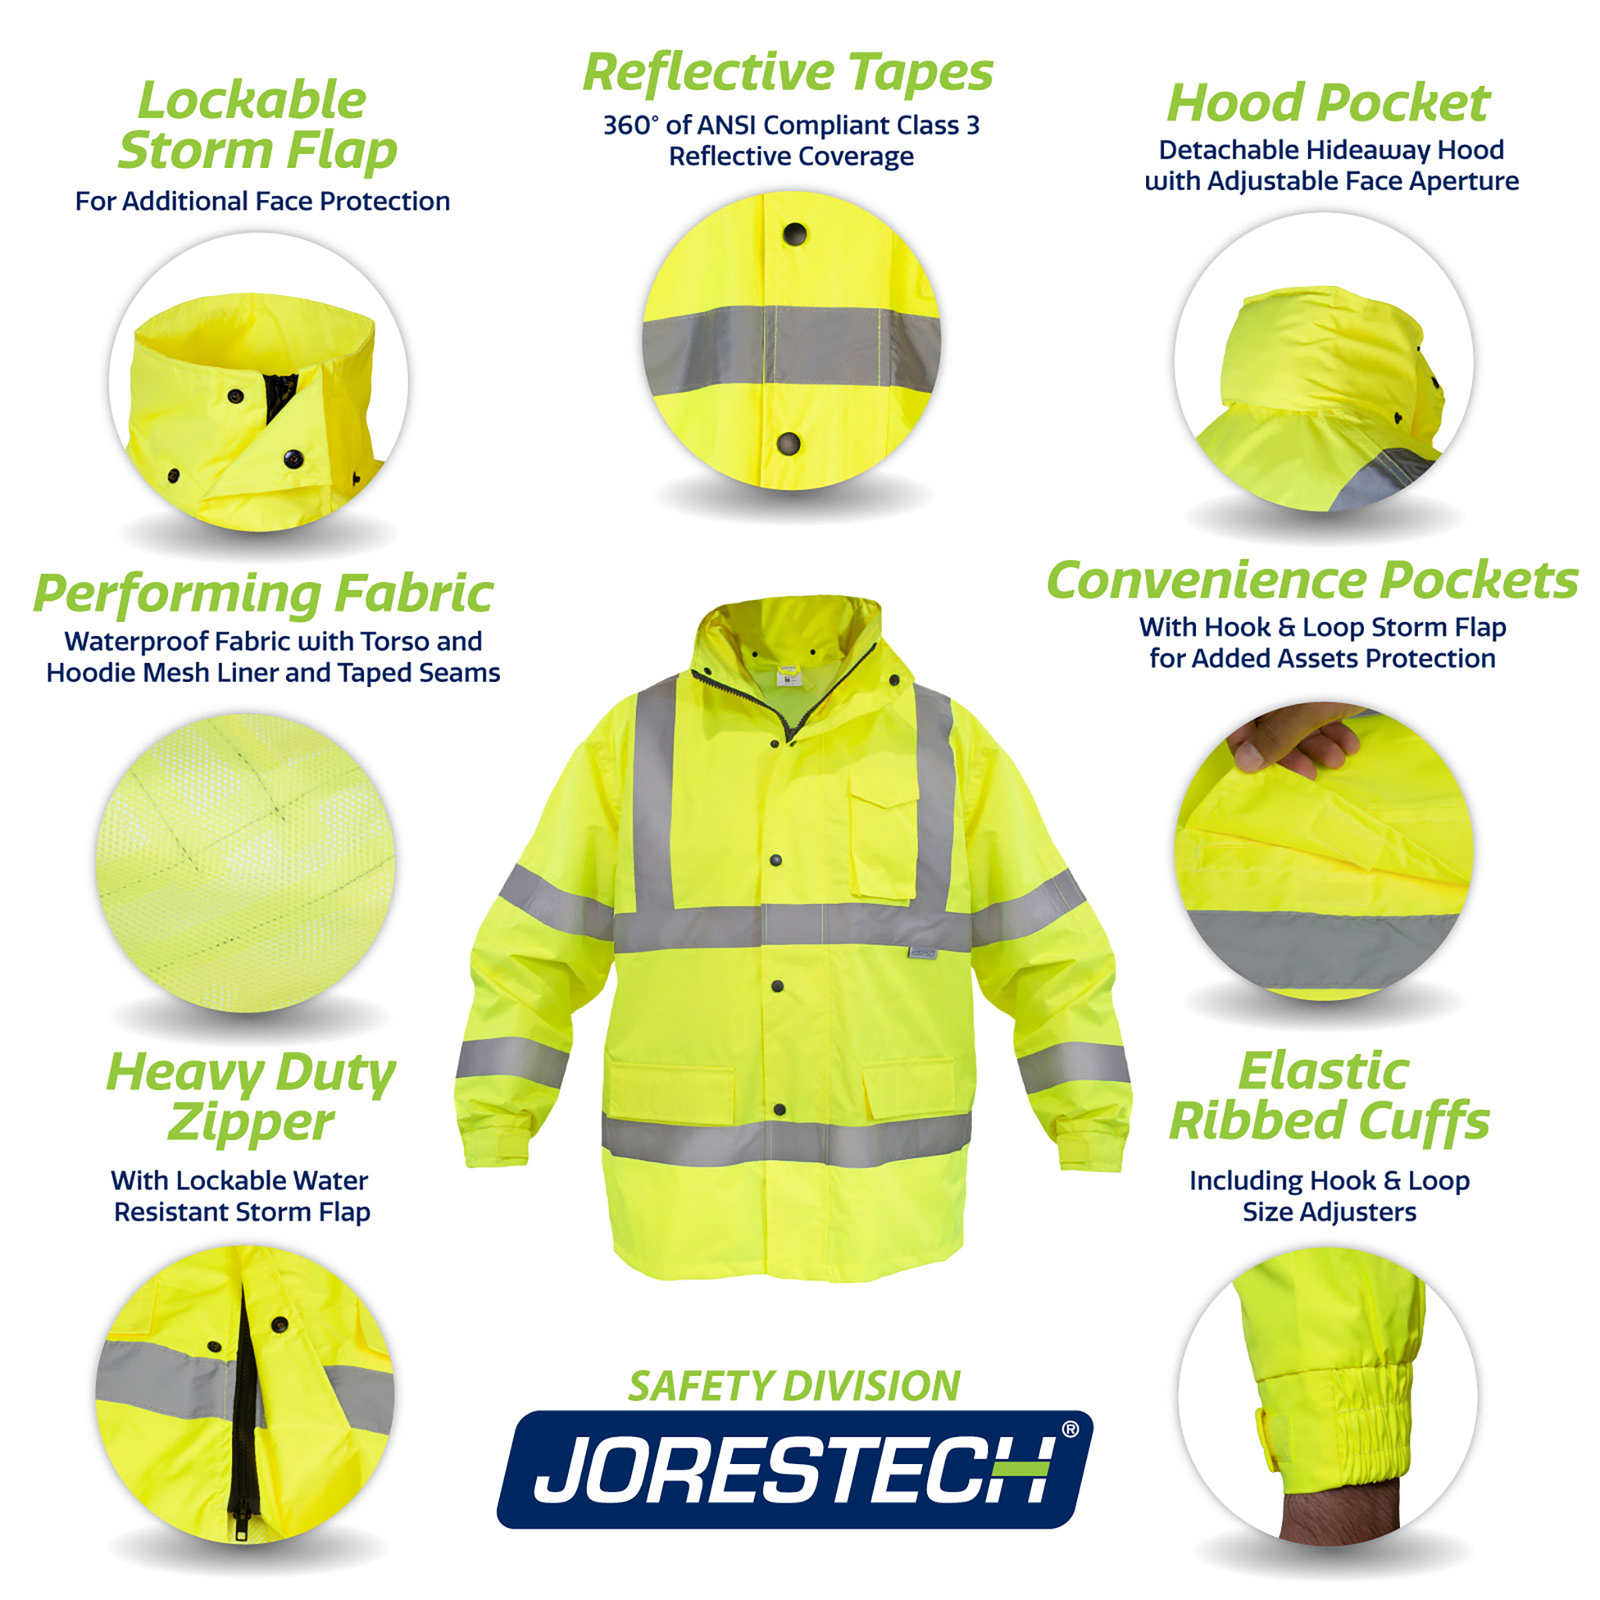 Yellow/lime rain jacket pus 7 call outs. Call outs read: Lockable storm flap for face protection. Reflective tapes ANSI compliant class 3. Hood pocket detachable and hide away hood. Performing fabric, waterproof, mesh liner and taped seams. Multiple convenience pockets. Heavy duty zipper with additional storm flap. Elastic ribbed cuffs with hook and loop strap.